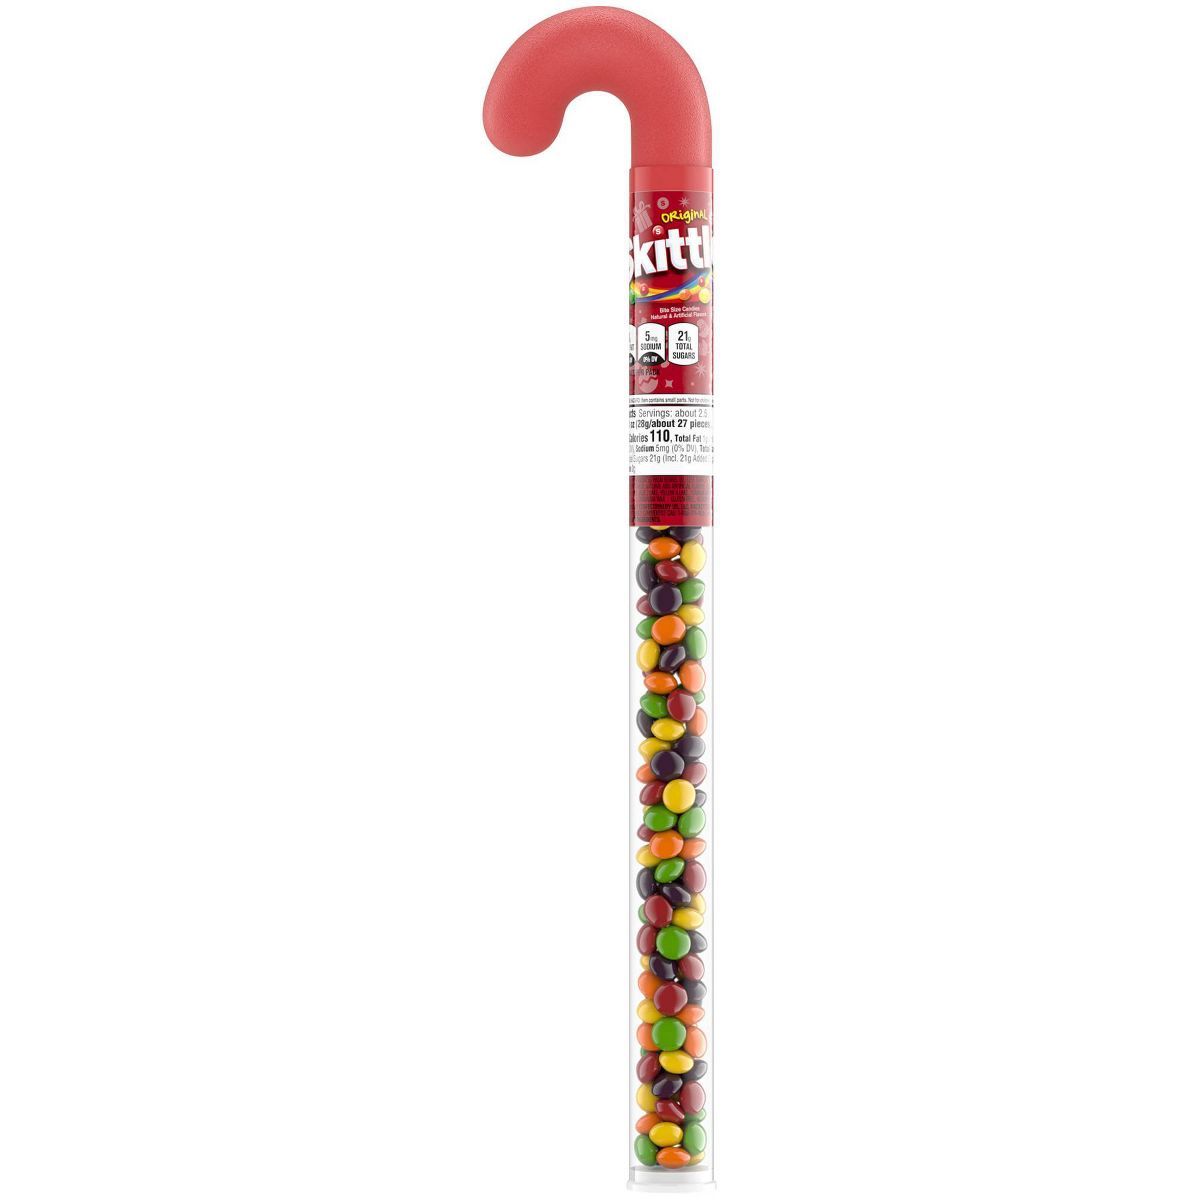 Skittles Filled Holiday Candy Canes - 2.6oz | Target